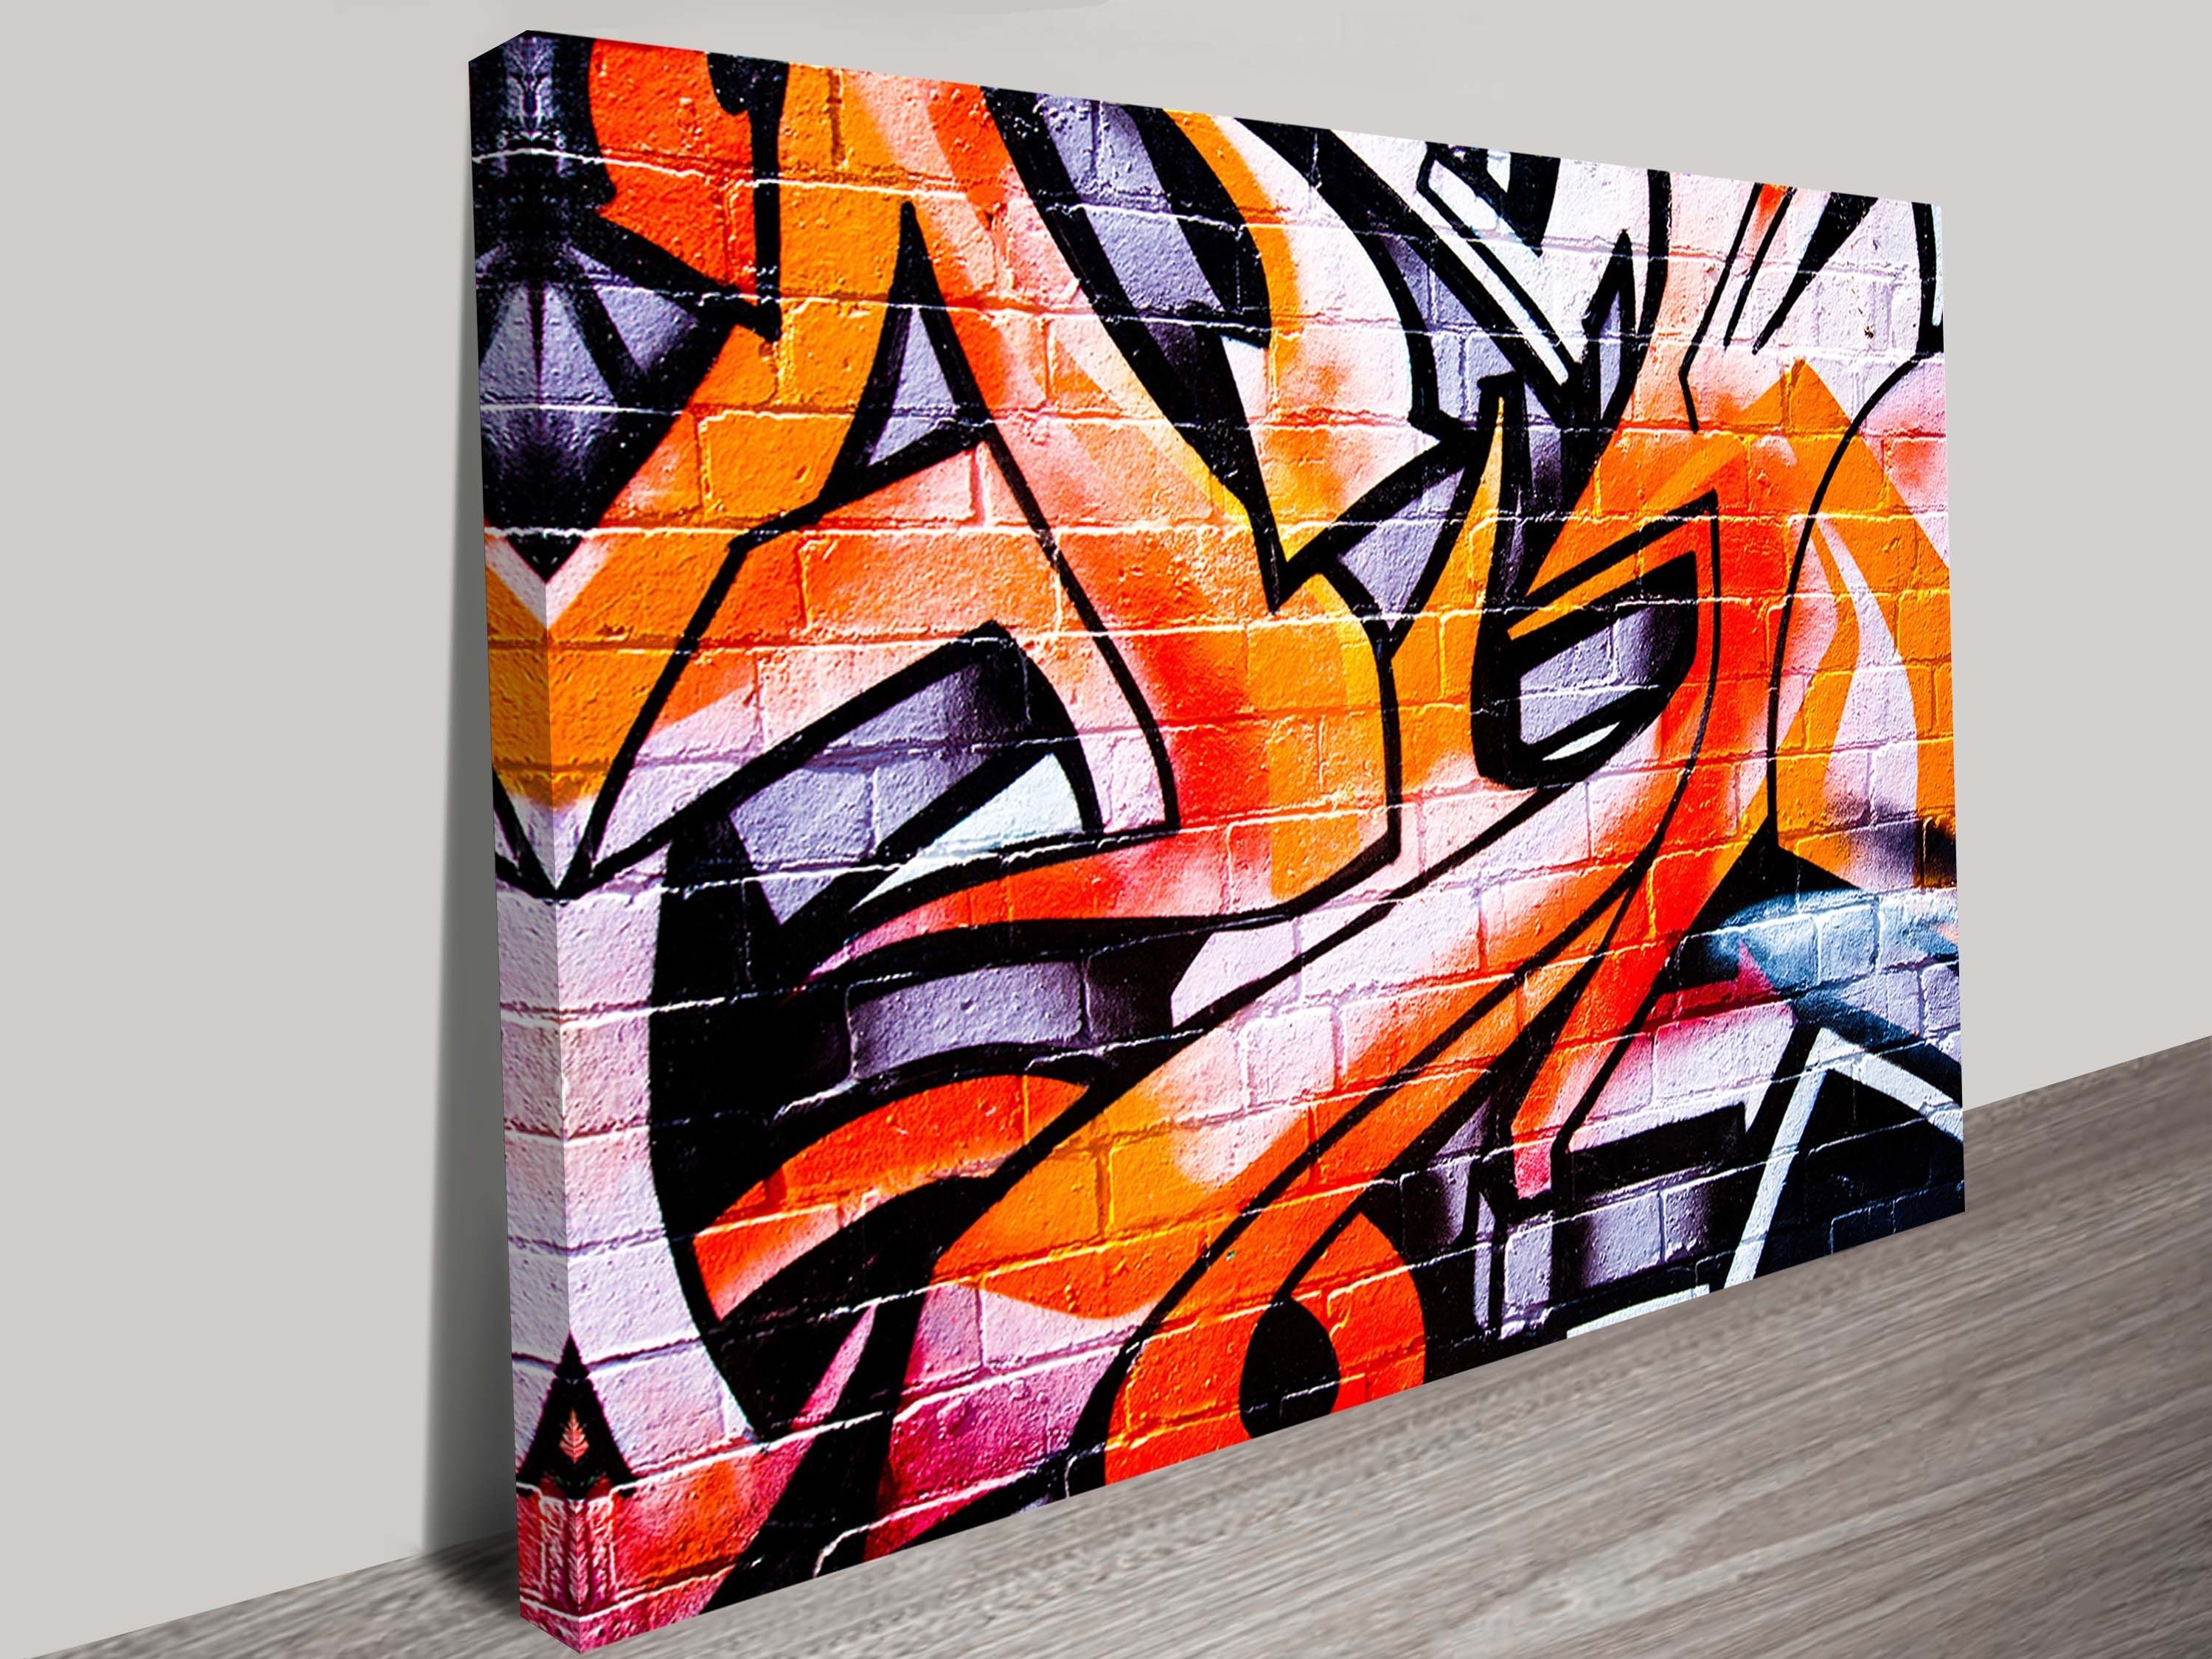 Framed Graffiti Artwork Australia Within Most Current Melbourne Abstract Wall Art (View 1 of 15)